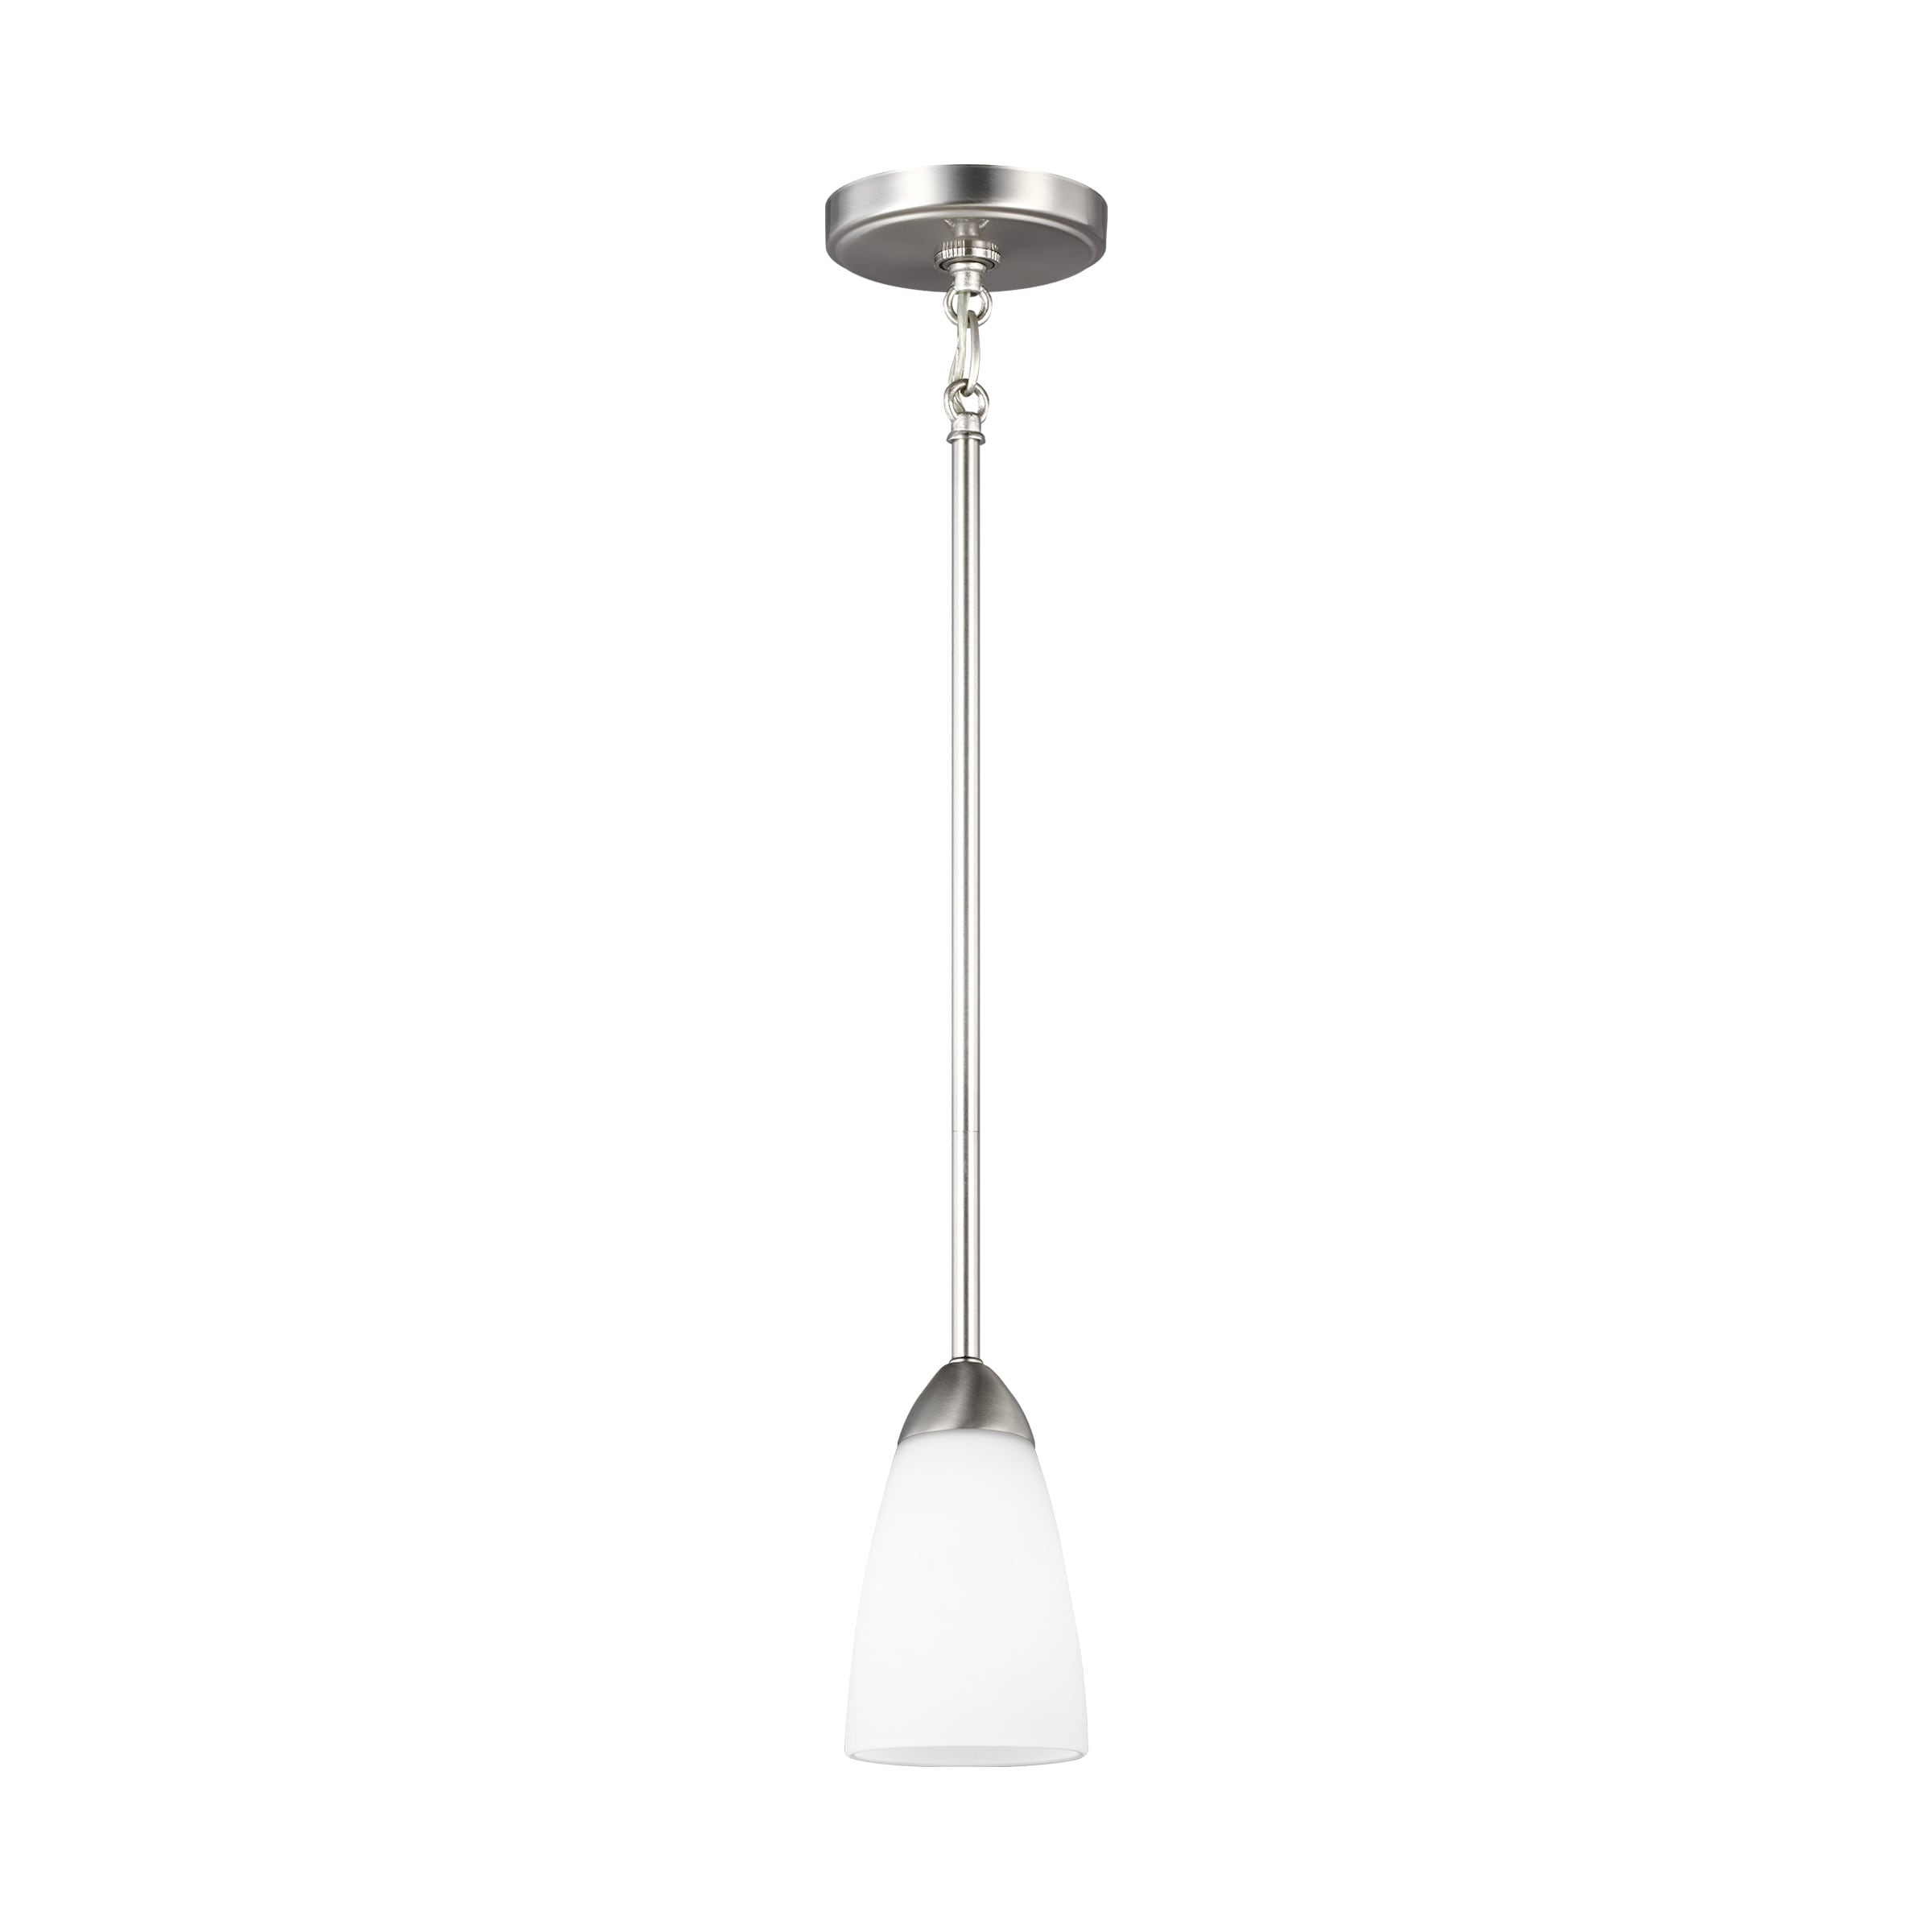 Generation Lighting Seville Brushed Nickel Mid-century Etched Glass ...